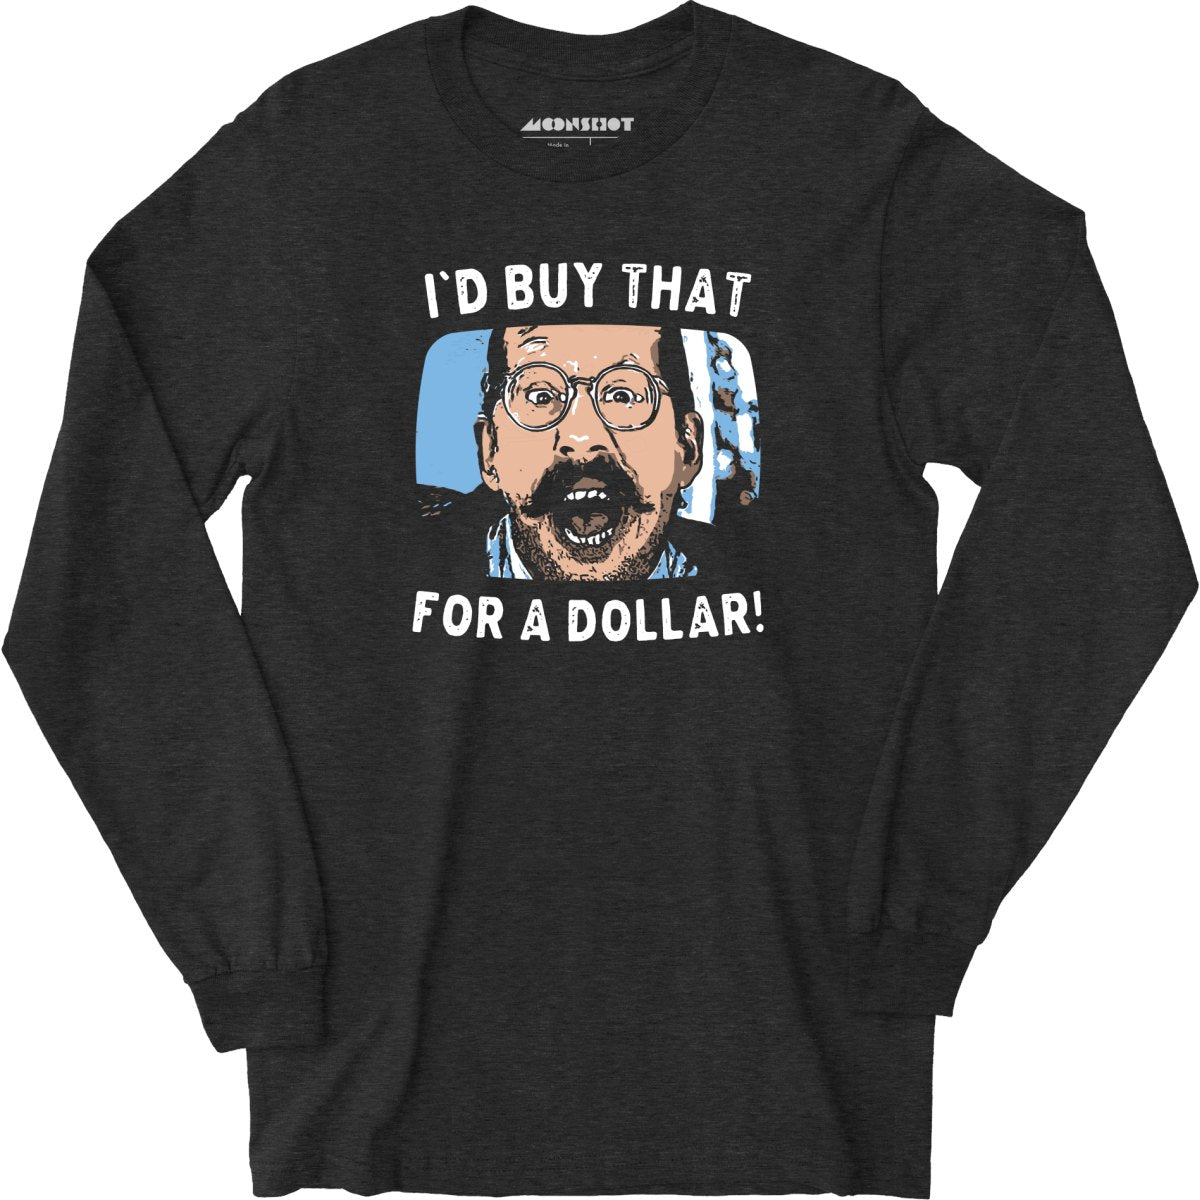 I'd Buy That For a Dollar - Long Sleeve T-Shirt